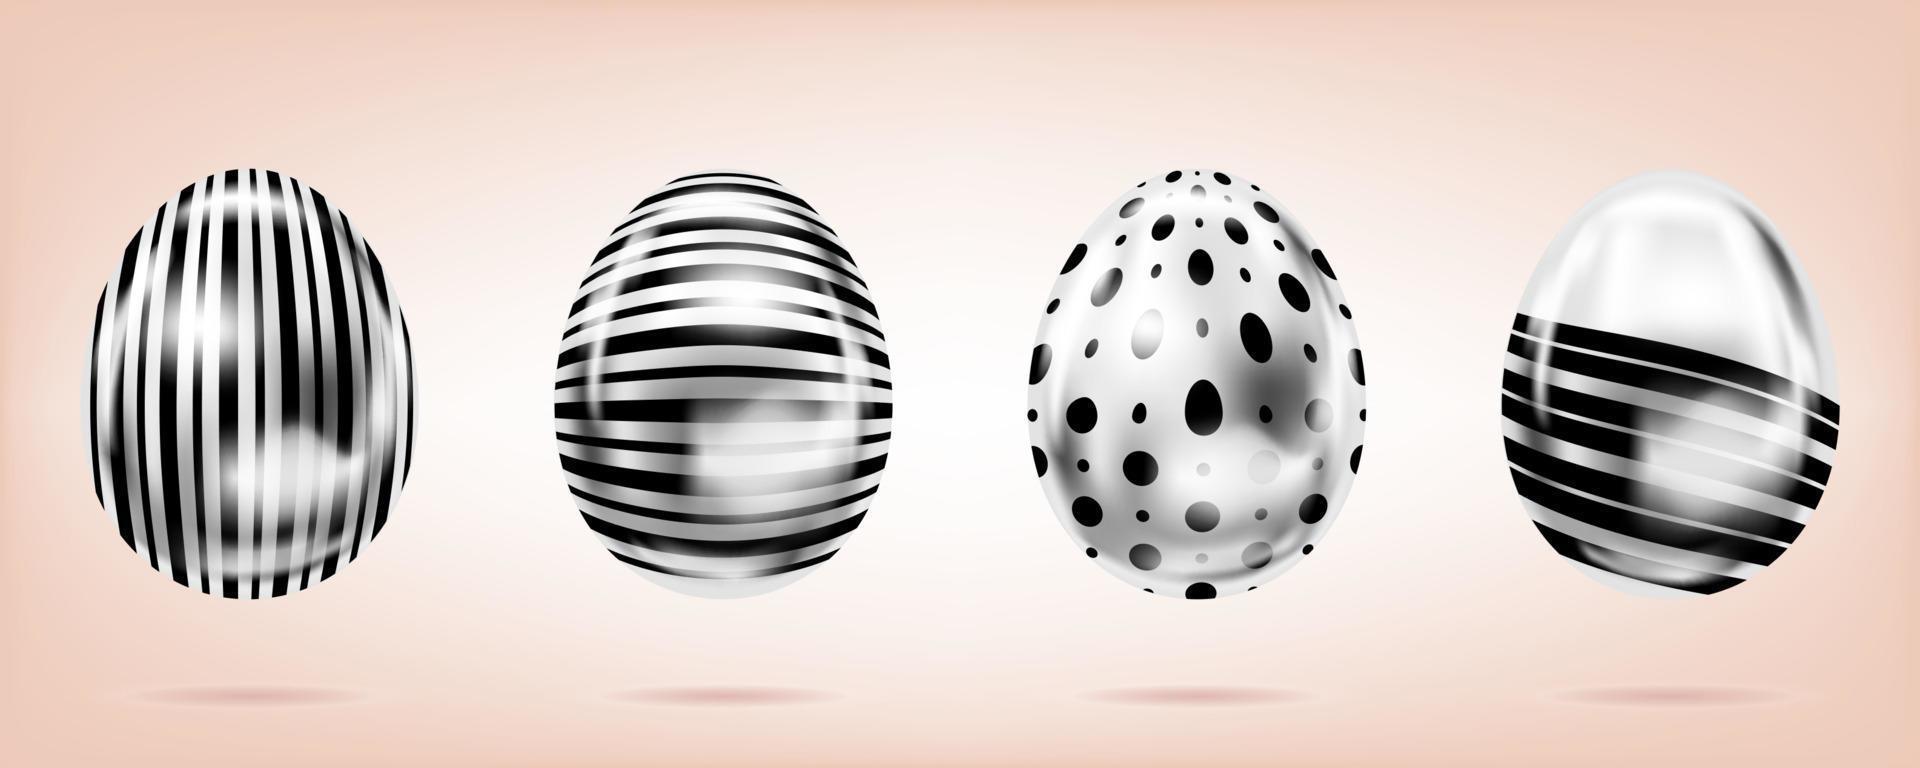 Four silver eggs on the pink background. Isolated objects for Easter. Dots and stripes ornate vector